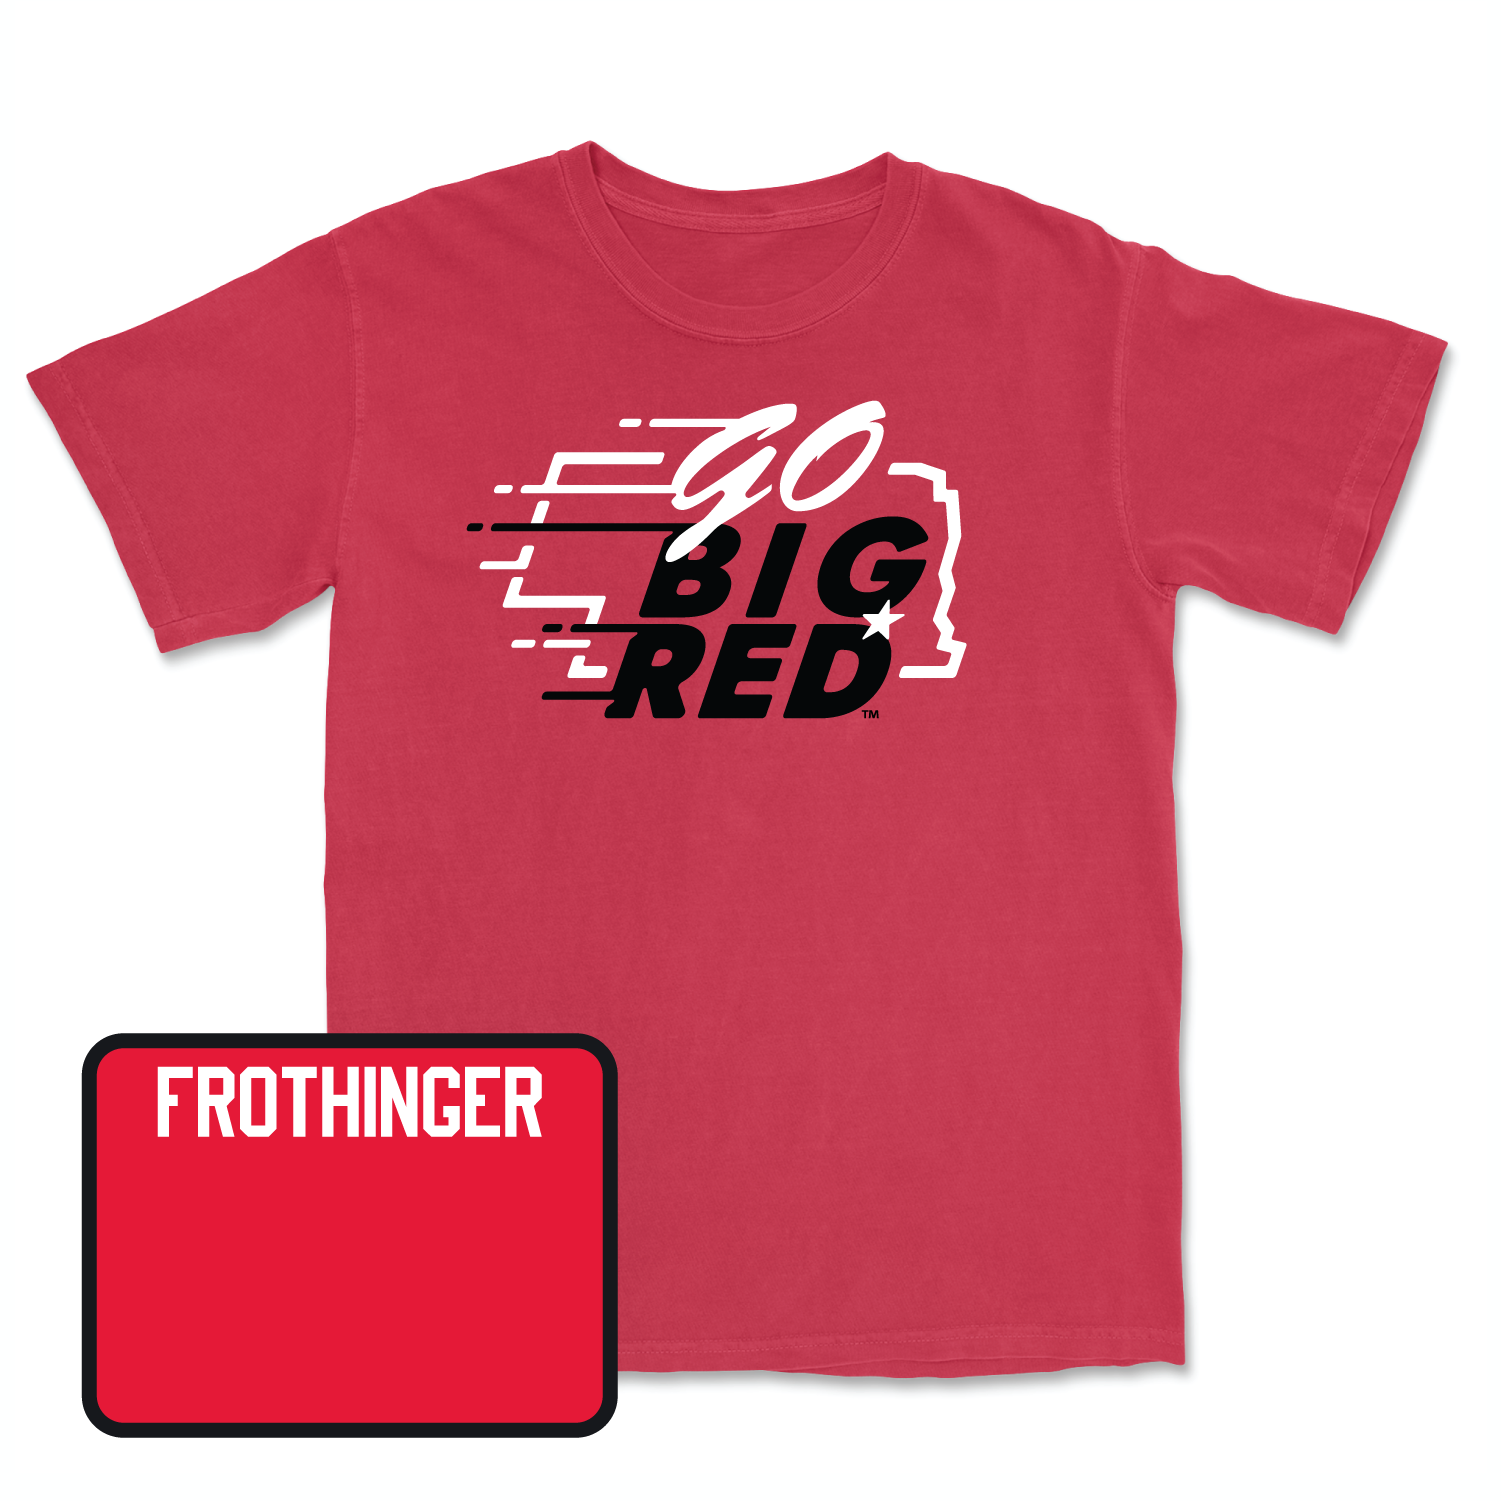 Red Wrestling GBR Tee X-Large / Tanner Frothinger | #141